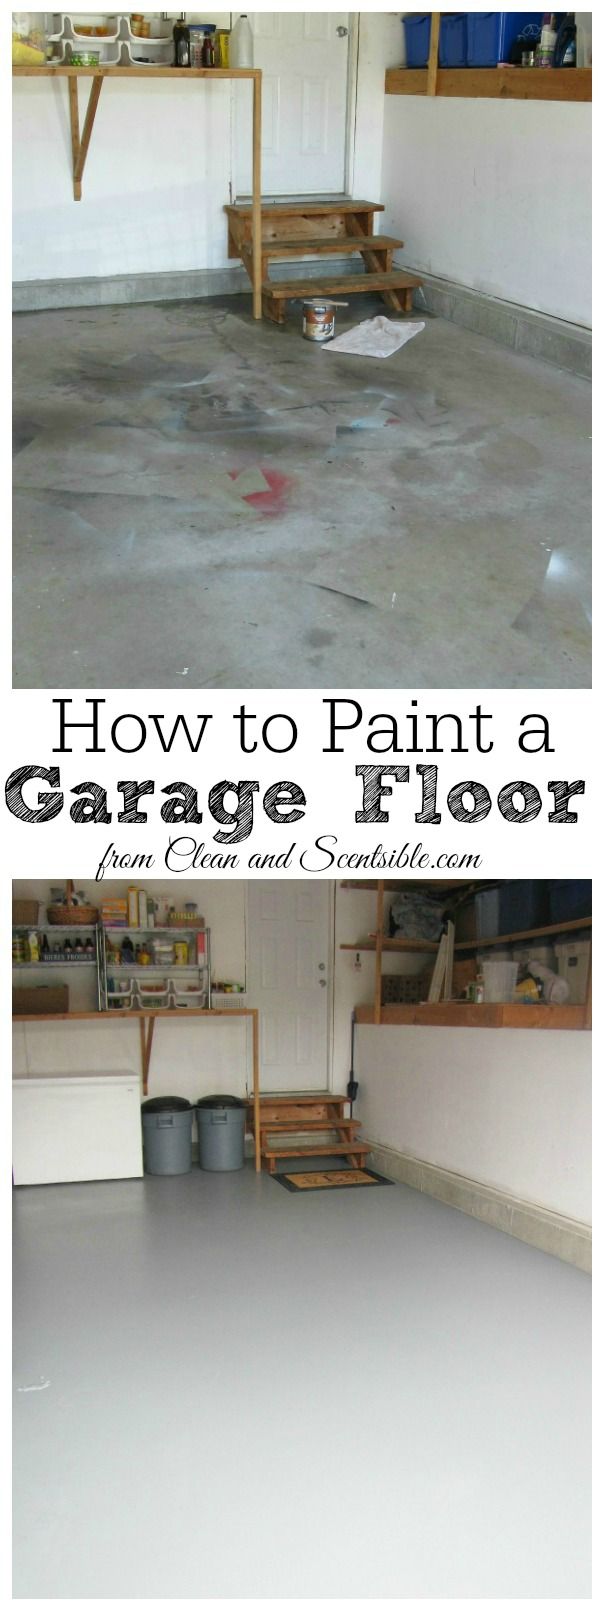 Painting The Garage Floor Makes It Easier To Clean And Resistant To Oil Stains, Chemicals, Water, Mold, And Mildew.